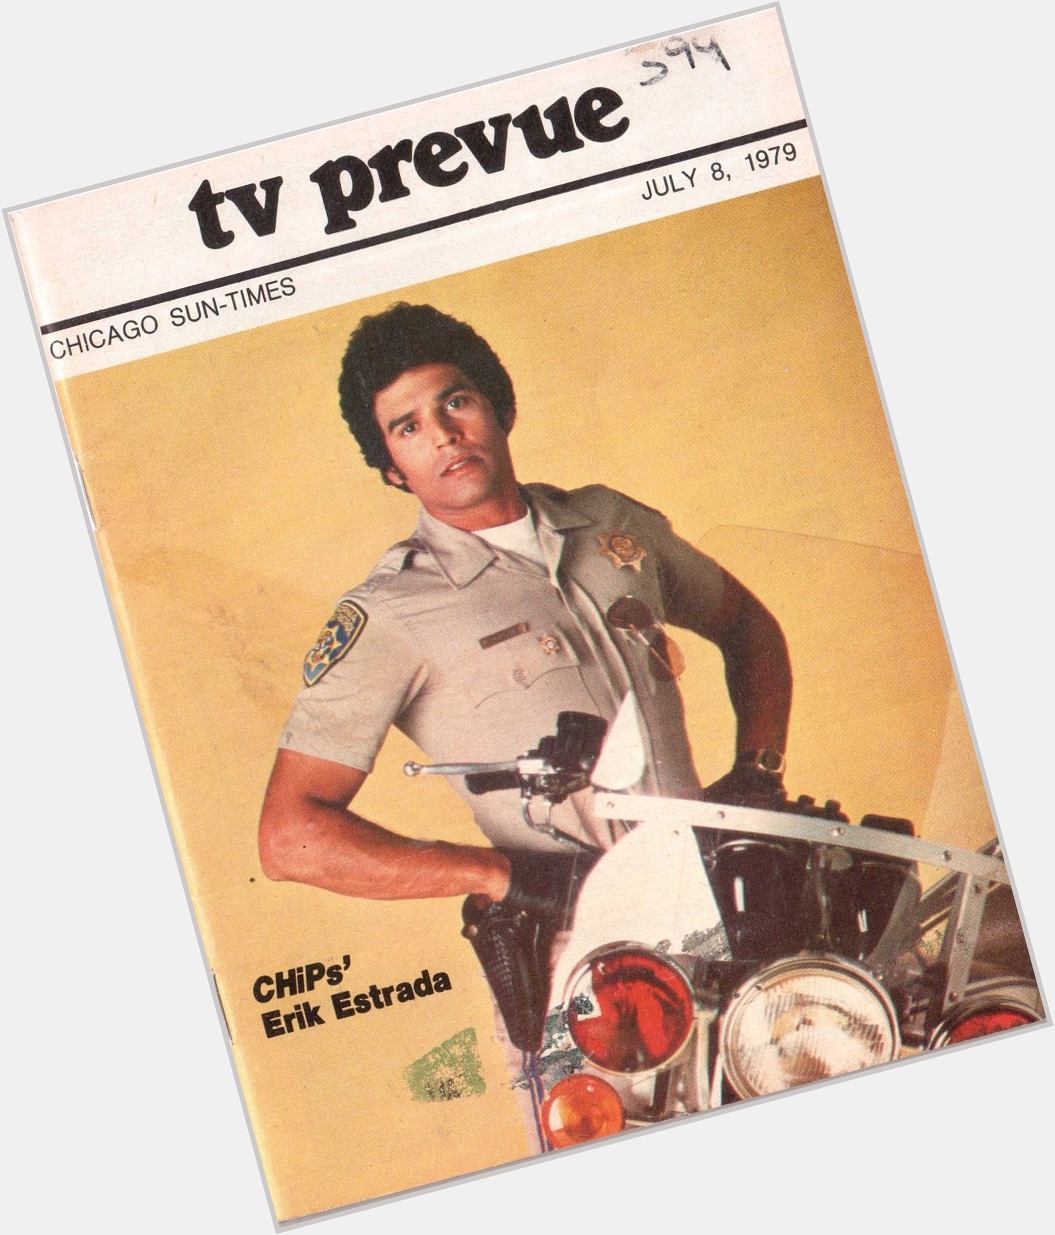 Happy Birthday to Erik Estrada, born on this day in 1949
Chicago Sun-Times TV Prevue.  July 8-14, 1979 